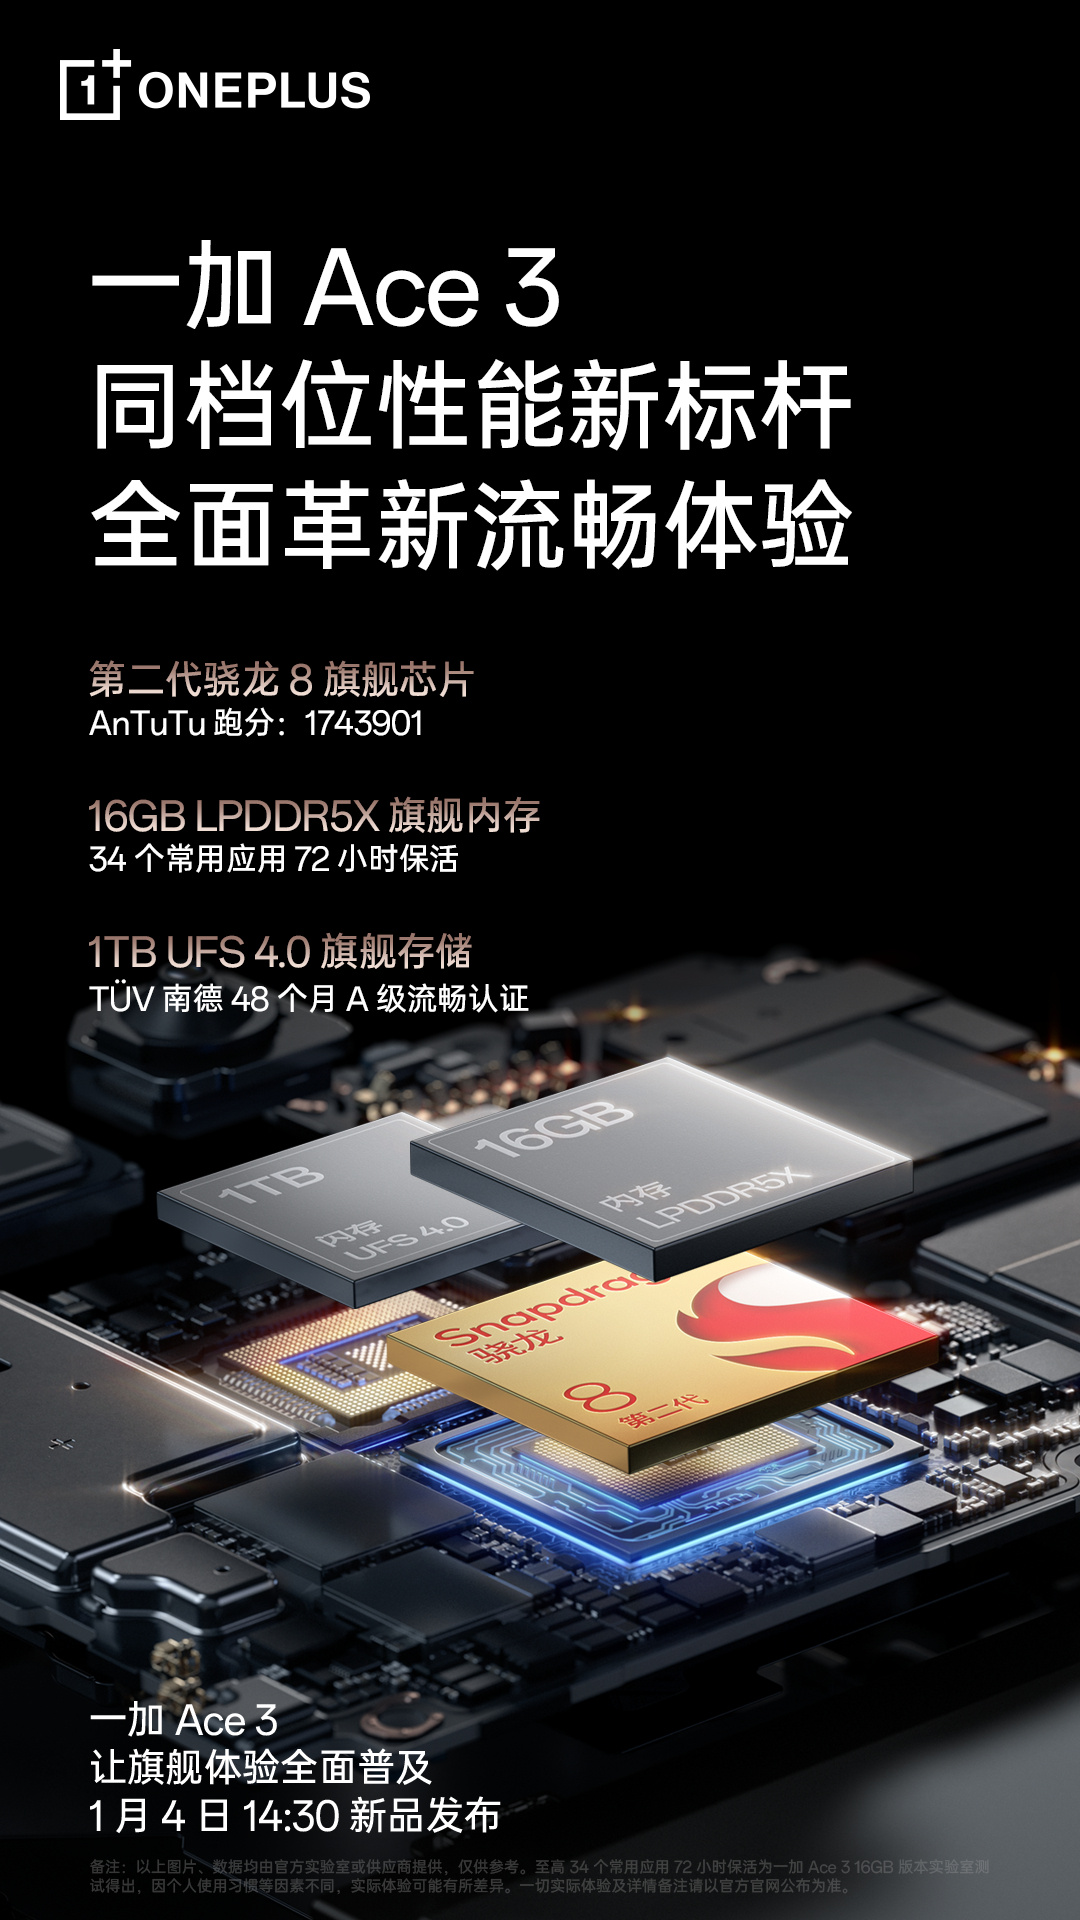 ONePlus Ace 3 chip